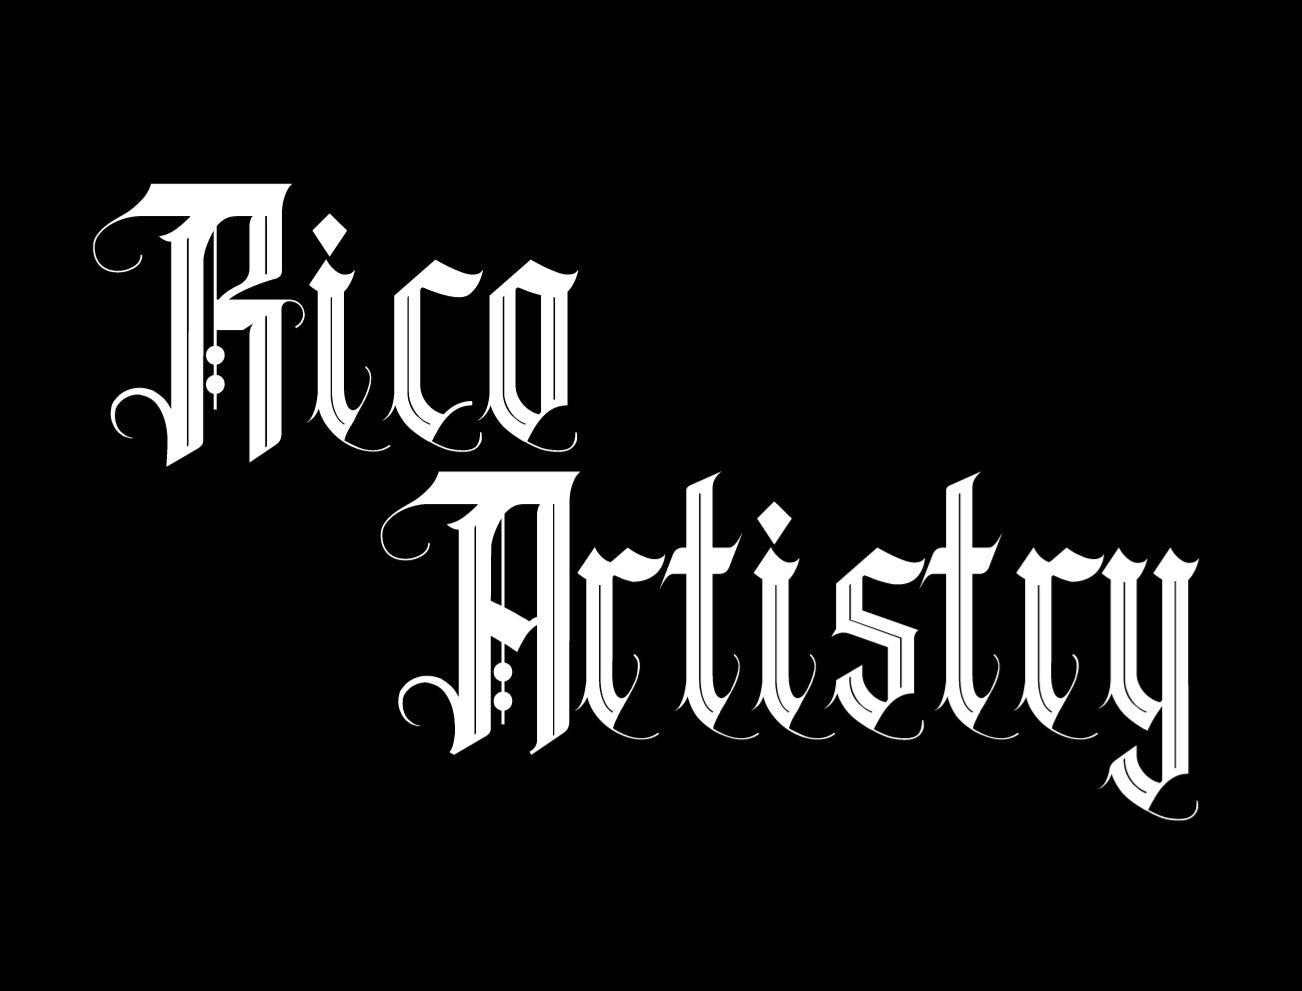 Load video: RICO ARTISTRY BY WENDY